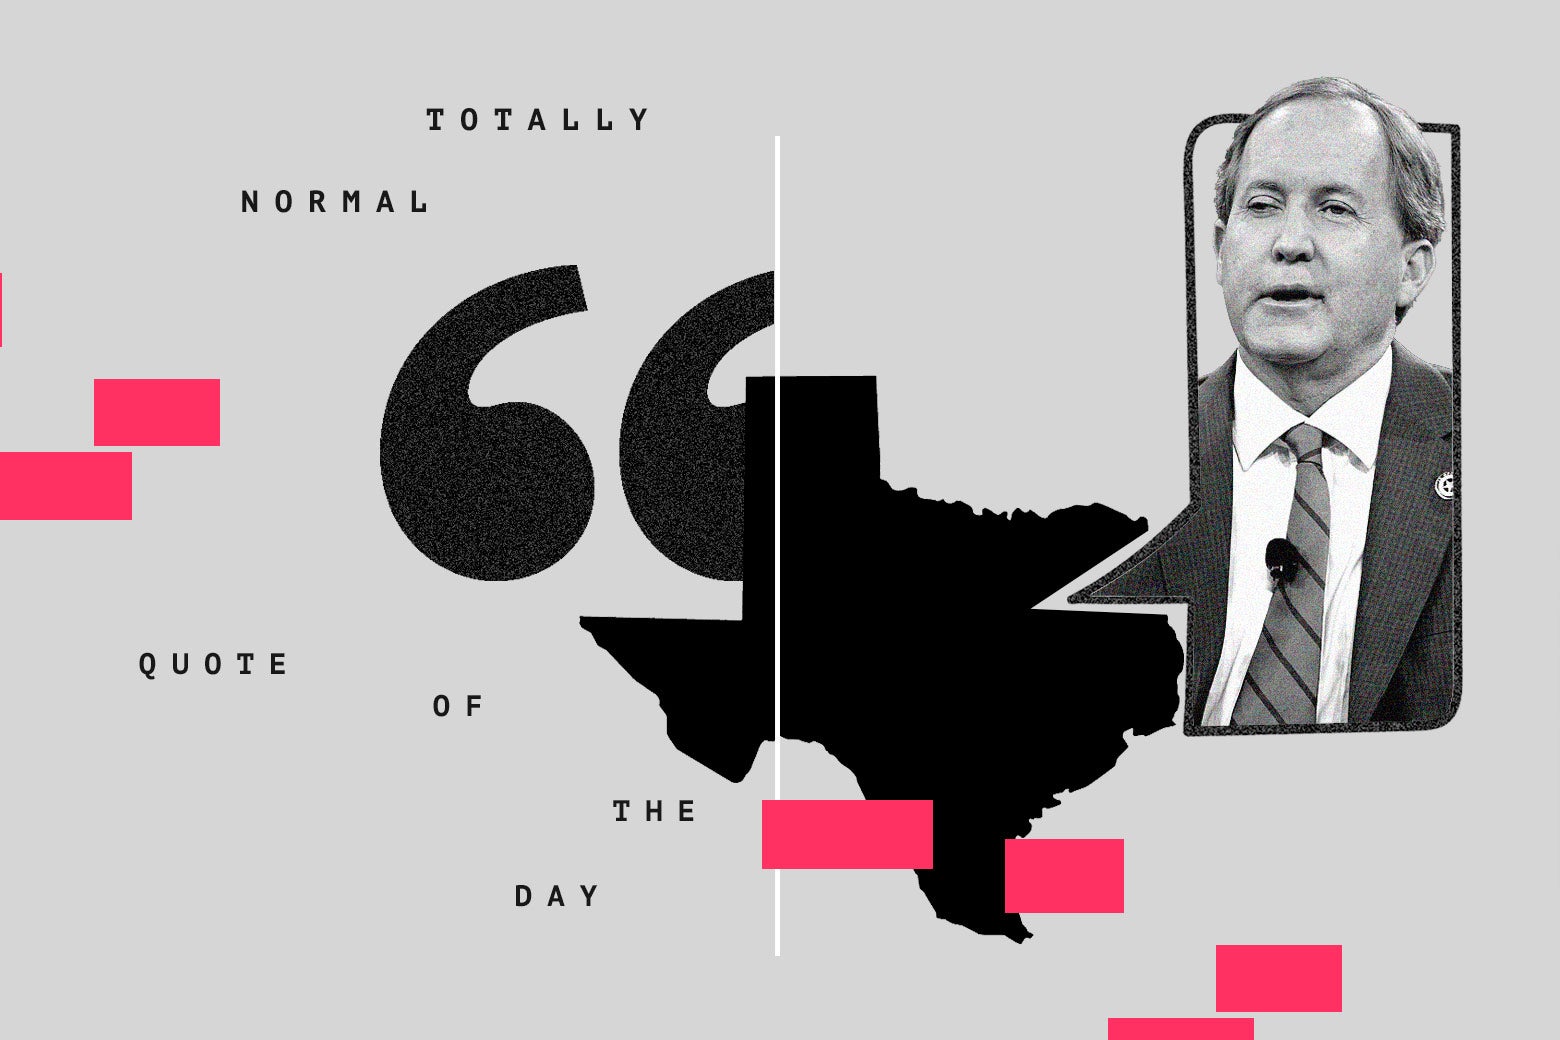 Totally Normal Quote art treatment featuring the shape of Texas, with Ken Paxton on a speech bubble emerging from it.